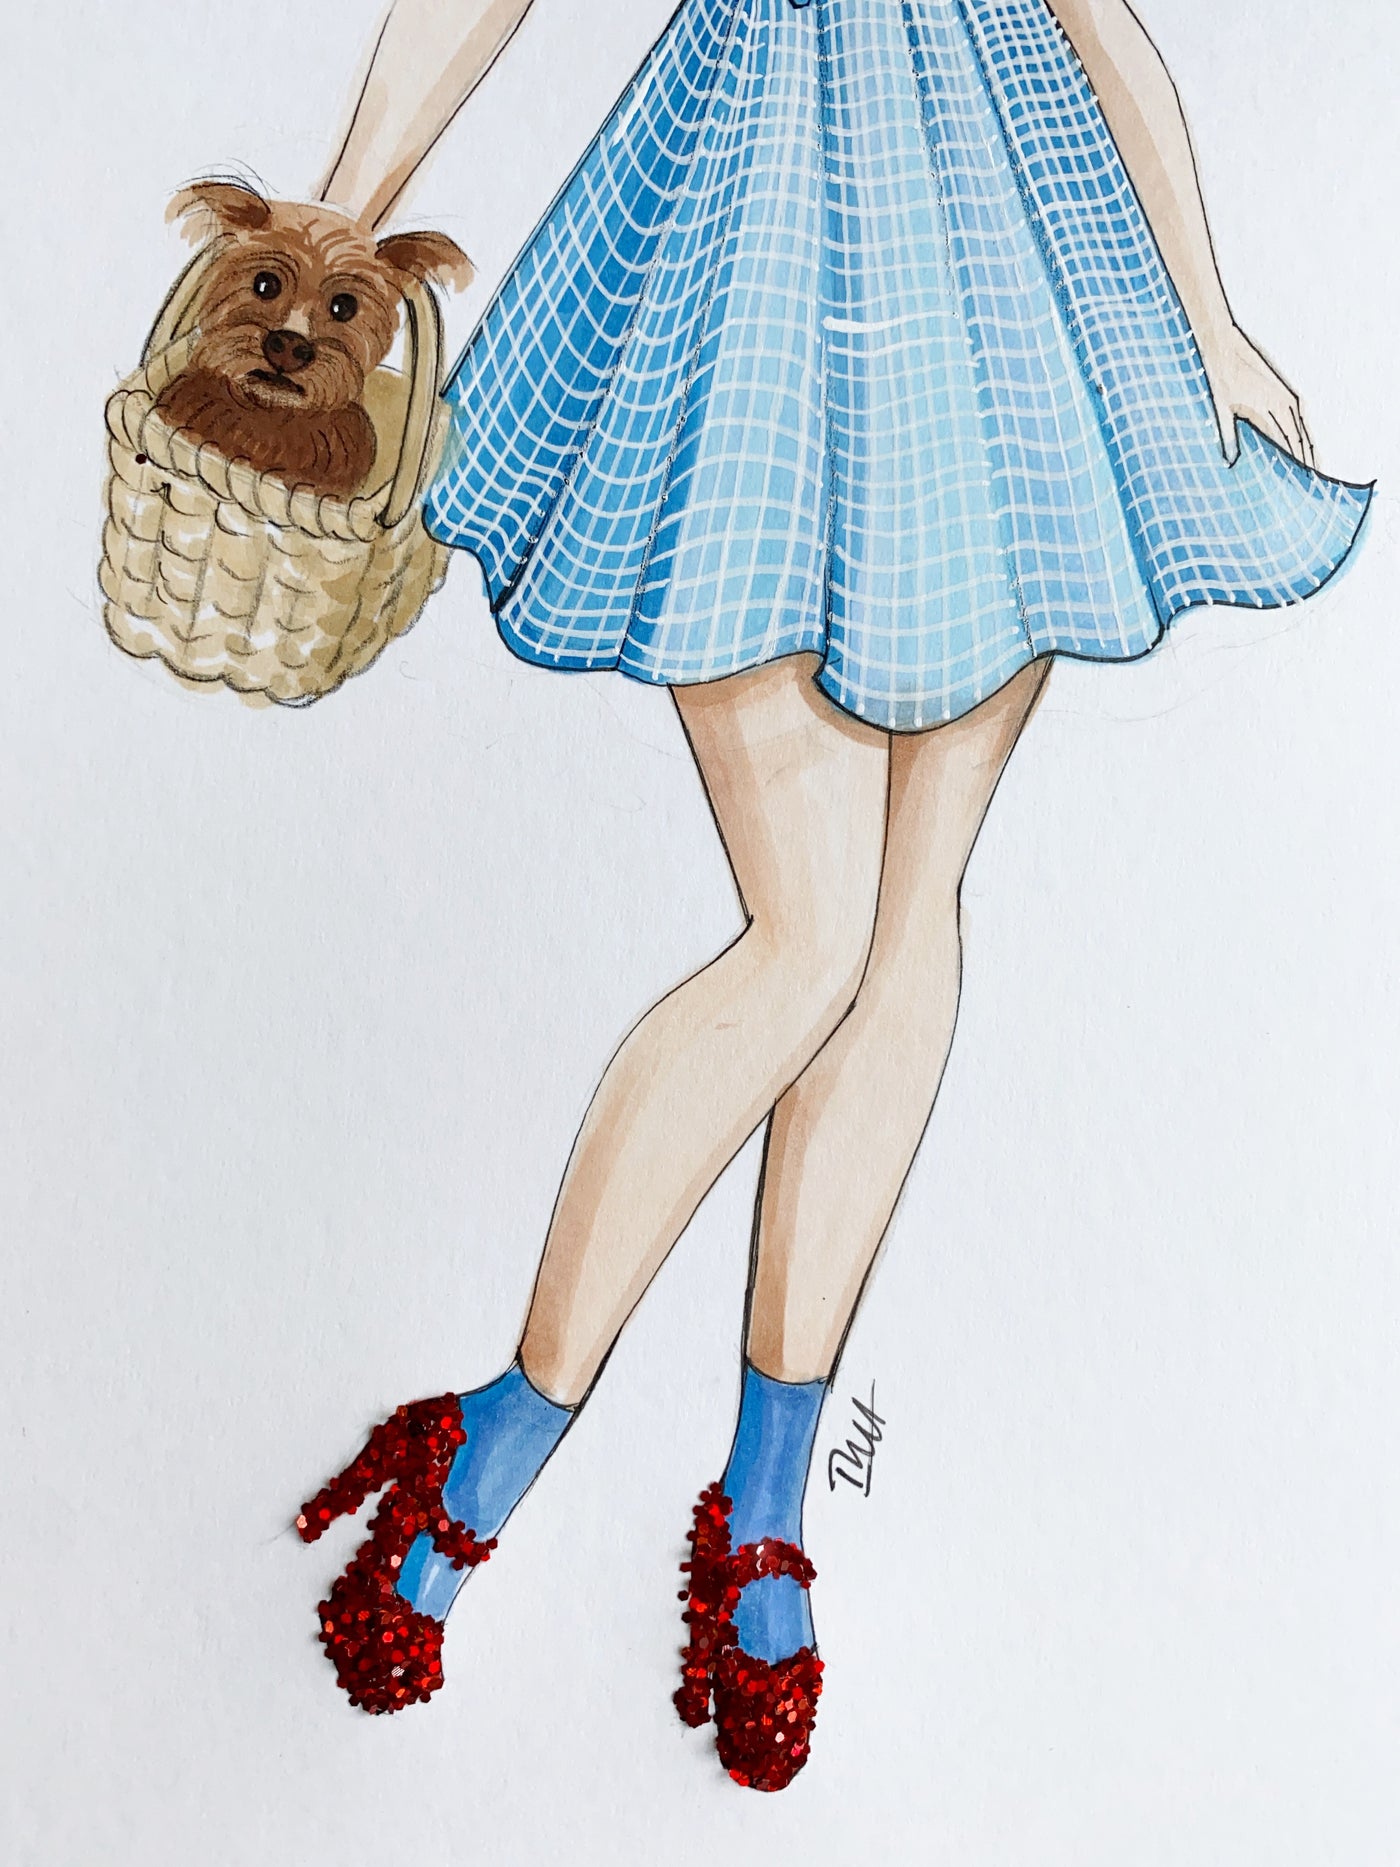 Dorothy from The Wizard of Oz Original Art